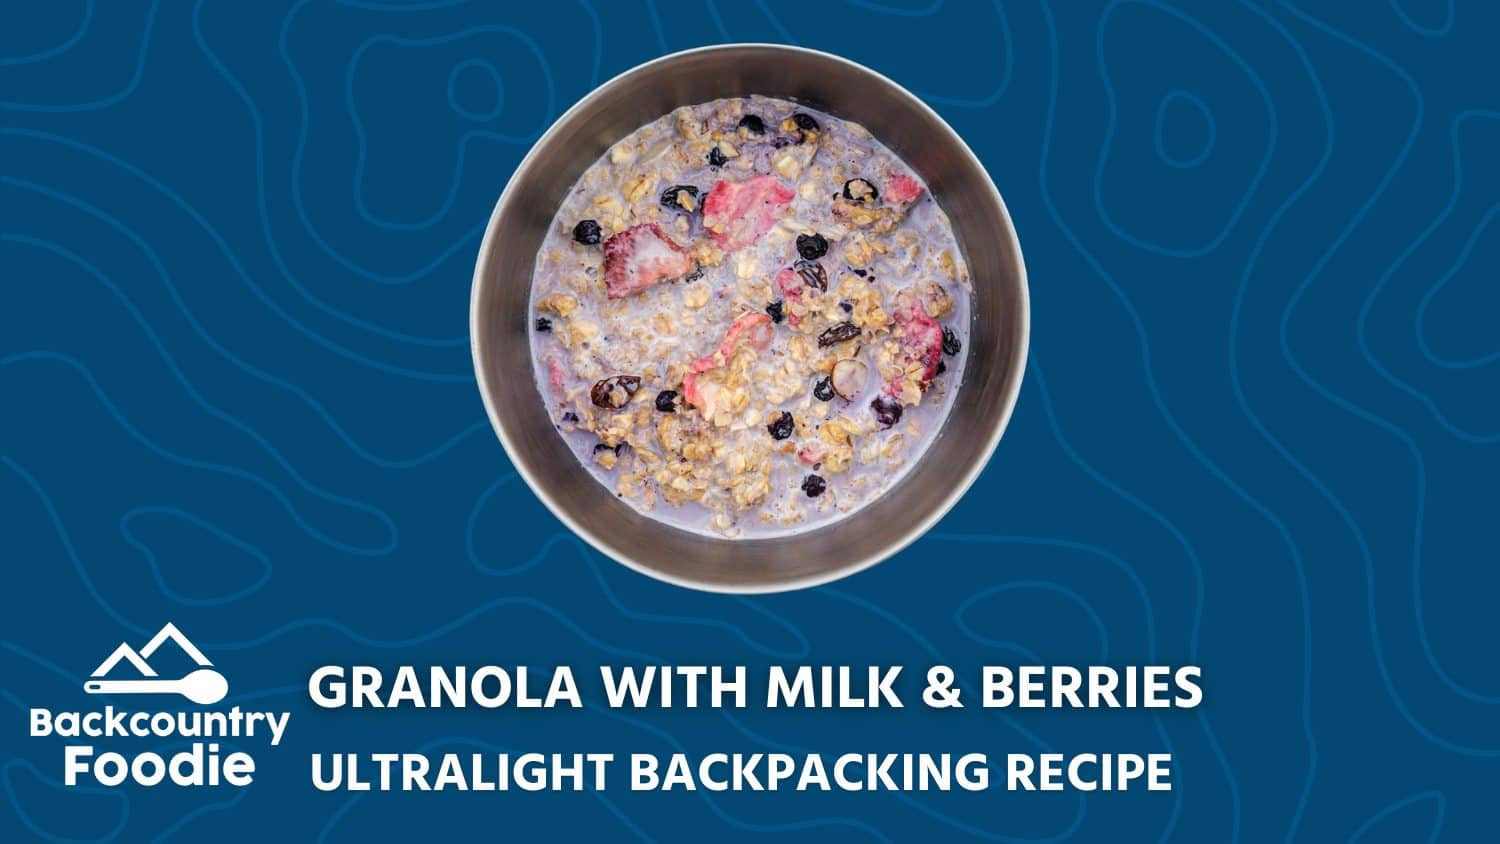 Backcountry Foodie Granola with Milk and Berries Backpacking Recipe